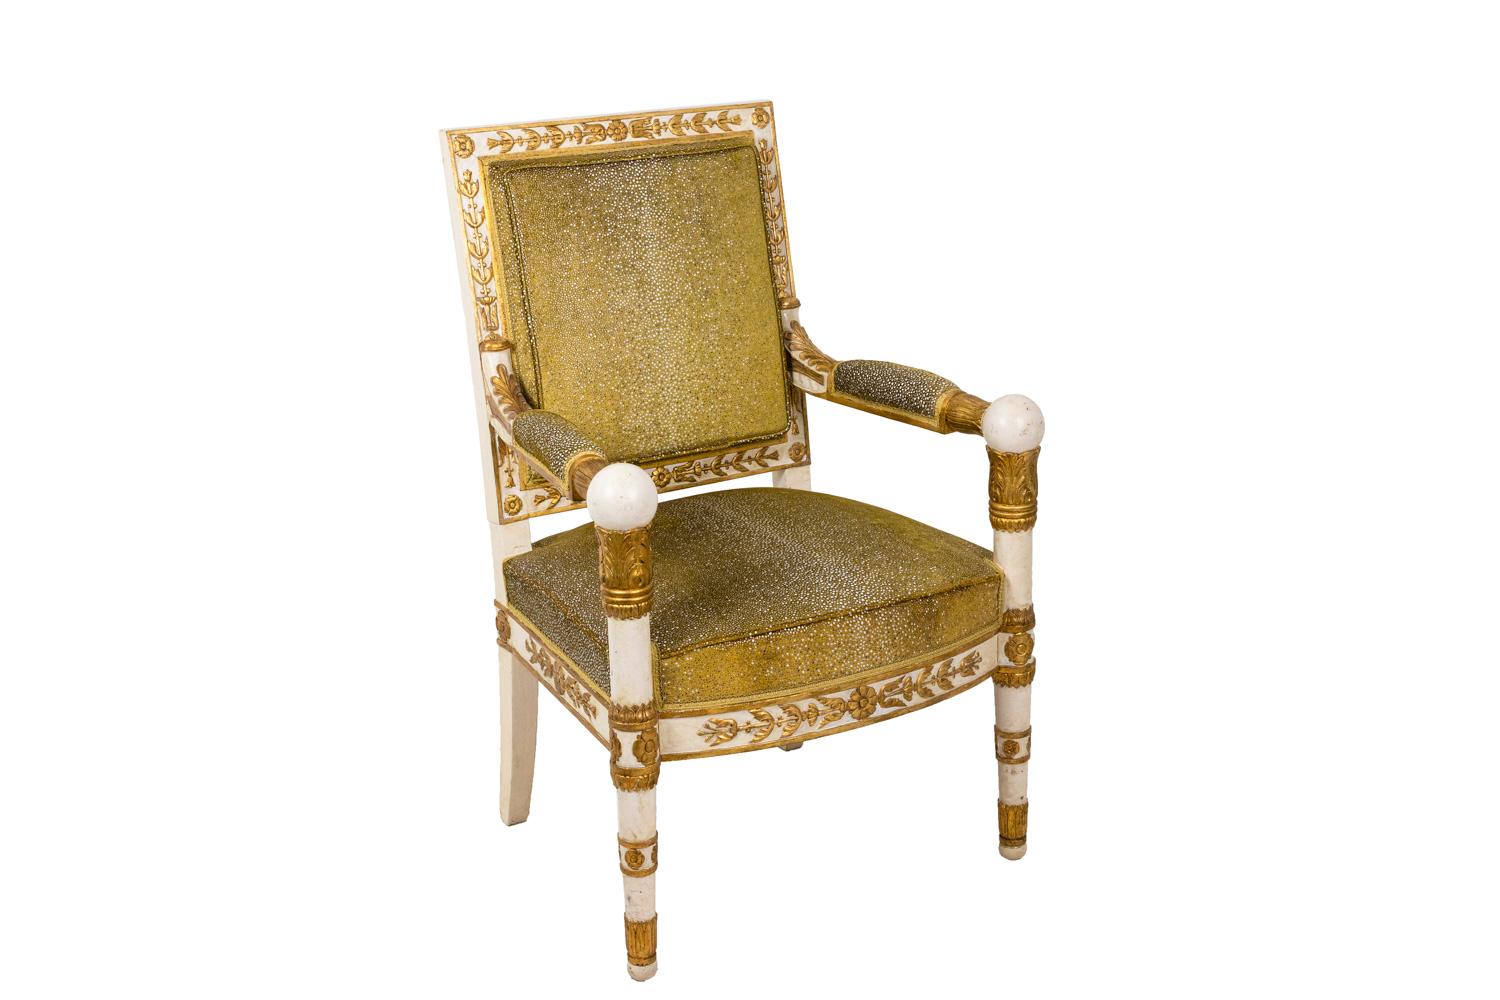 Empire style white carved wood with gold highlights pair of armchairs.
Standing on two front tapered legs and two back saber legs. Straight apron and uprights, rectangular backseat and seat.
Spherical handling part of the armrests, reminding the